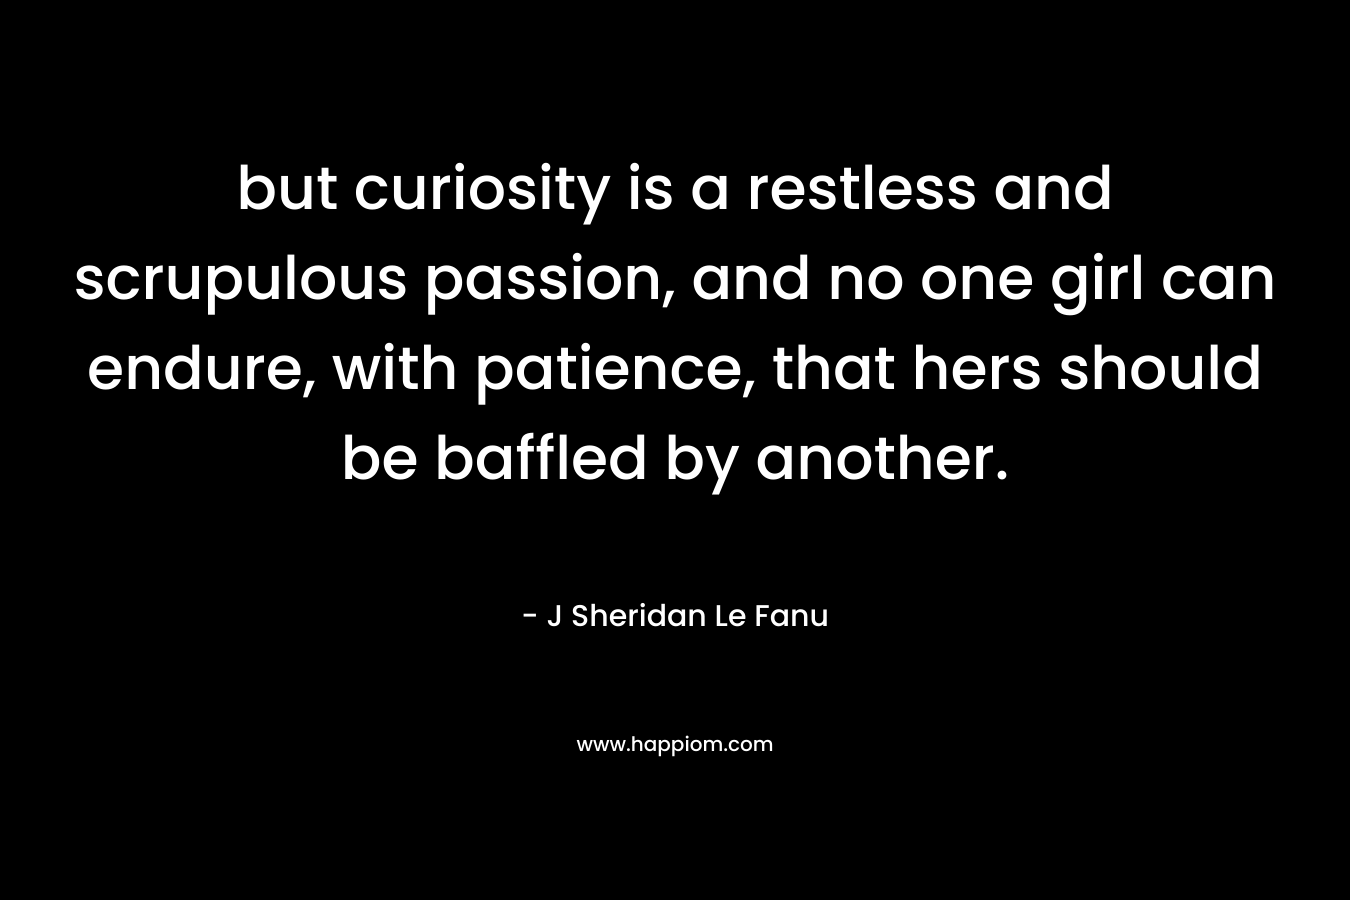 but curiosity is a restless and scrupulous passion, and no one girl can endure, with patience, that hers should be baffled by another. – J Sheridan Le Fanu